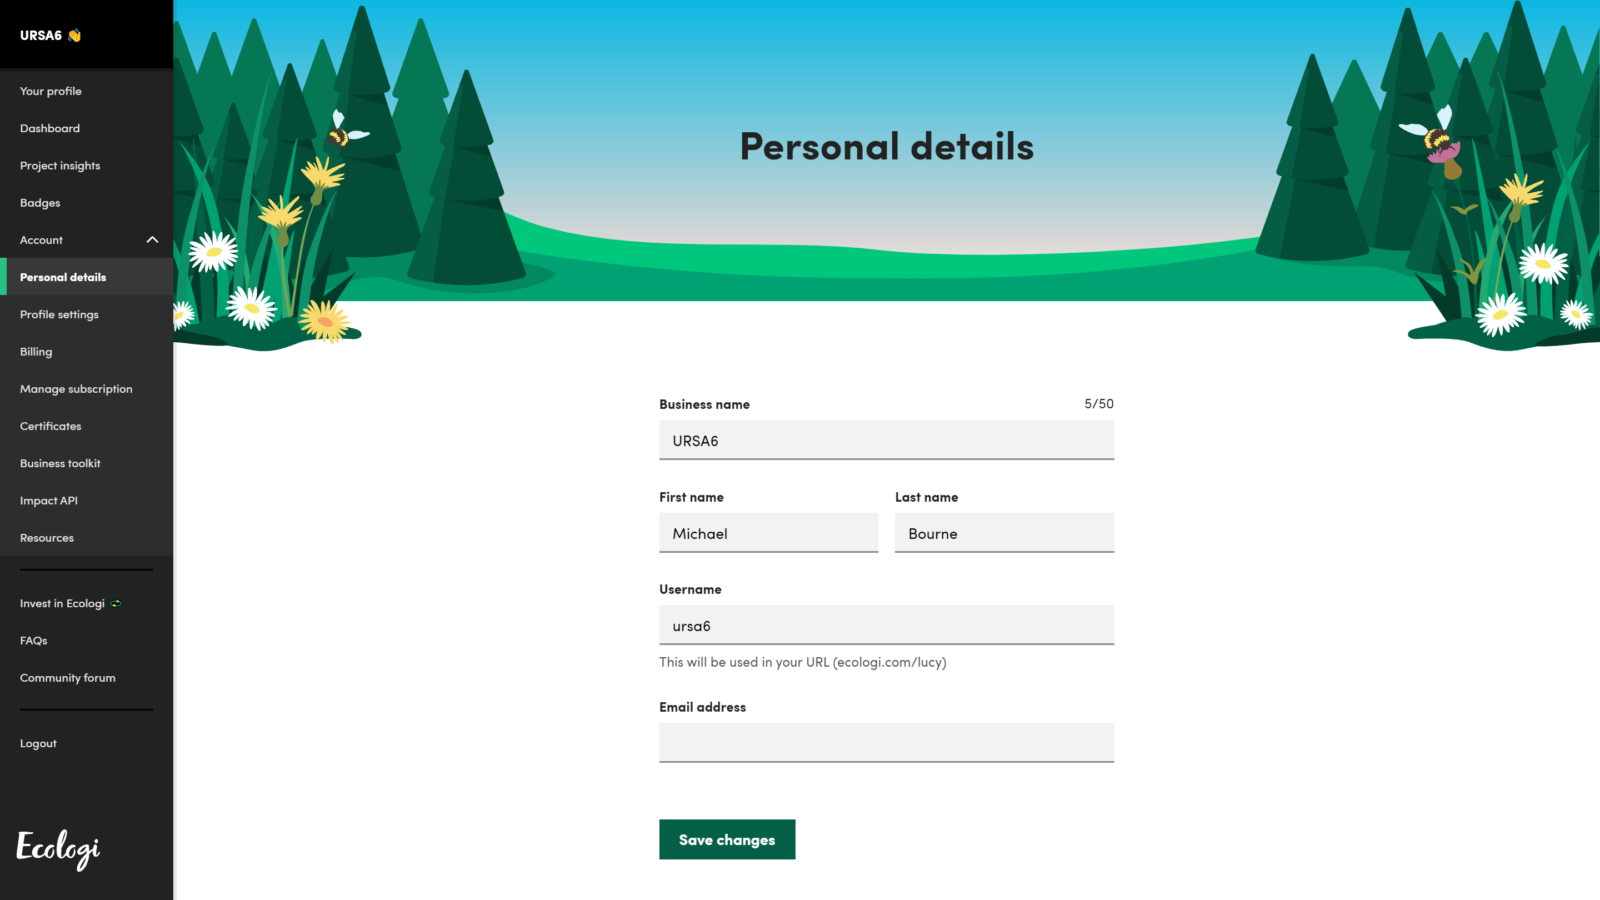 Get your username from the Personal Details page